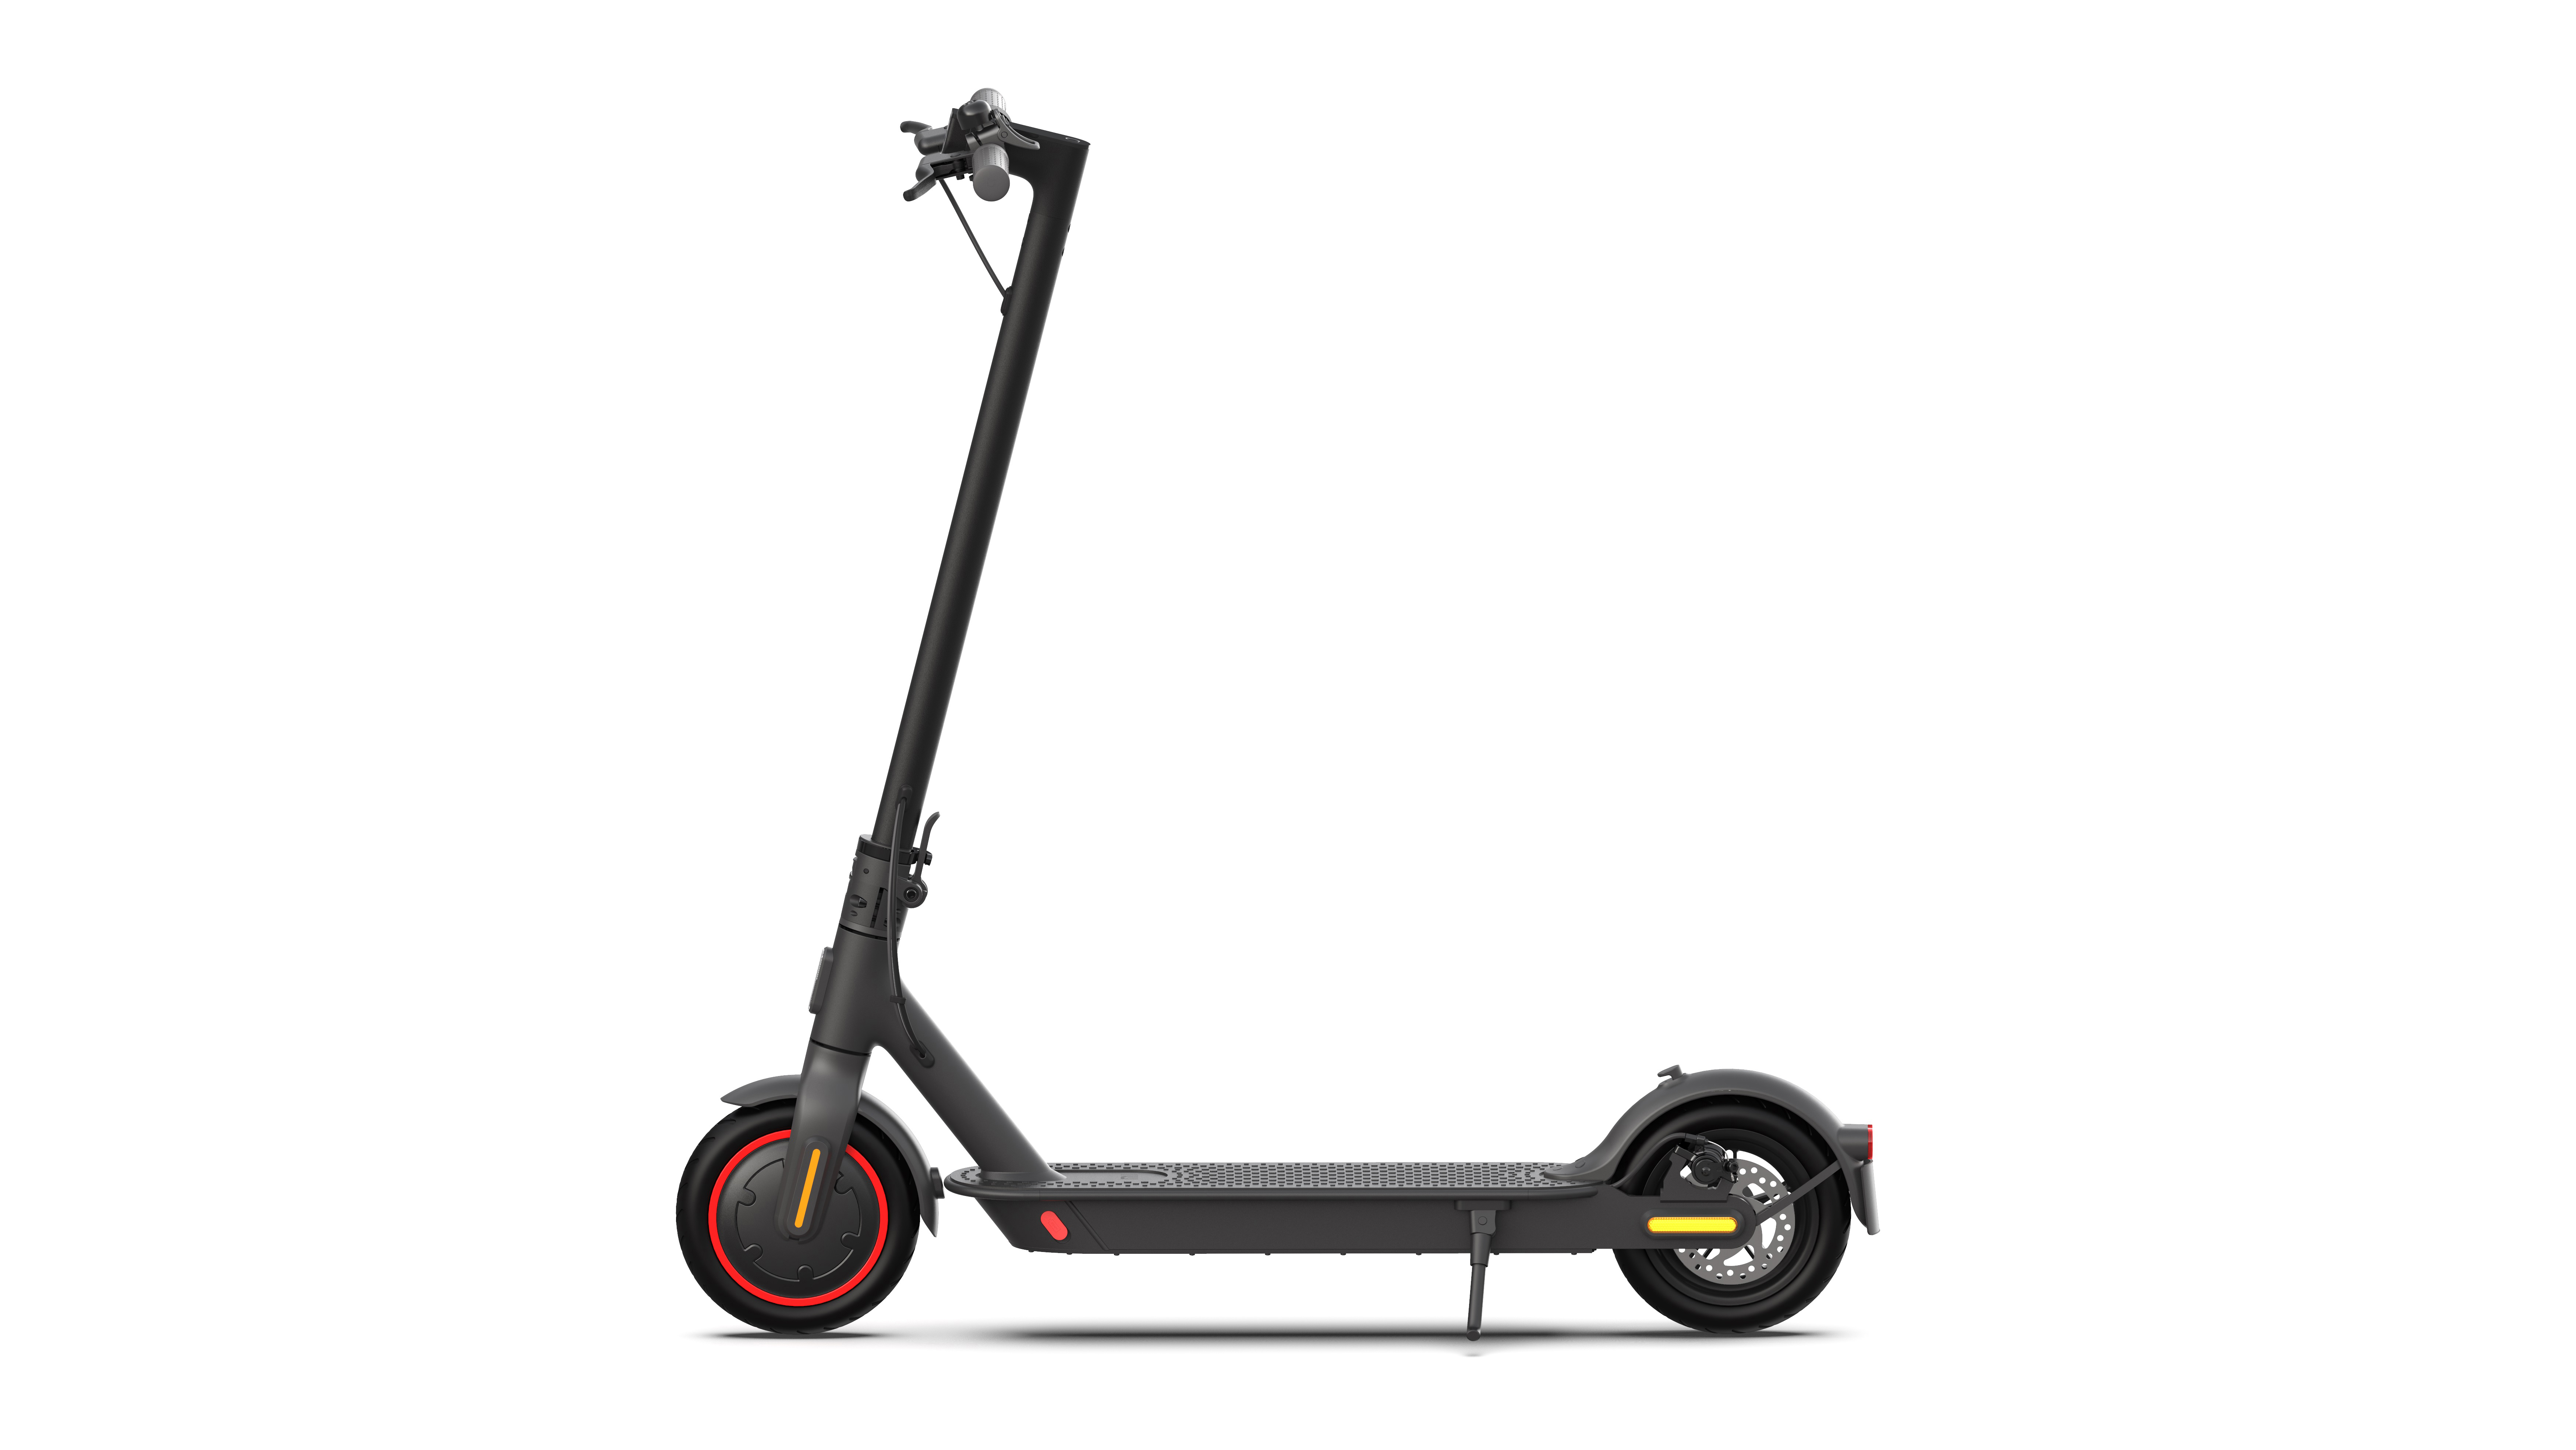 XIAOMI Mi Anthrazit) Pro E-Scooter 2 Zoll, Scooter (8,5 Electric